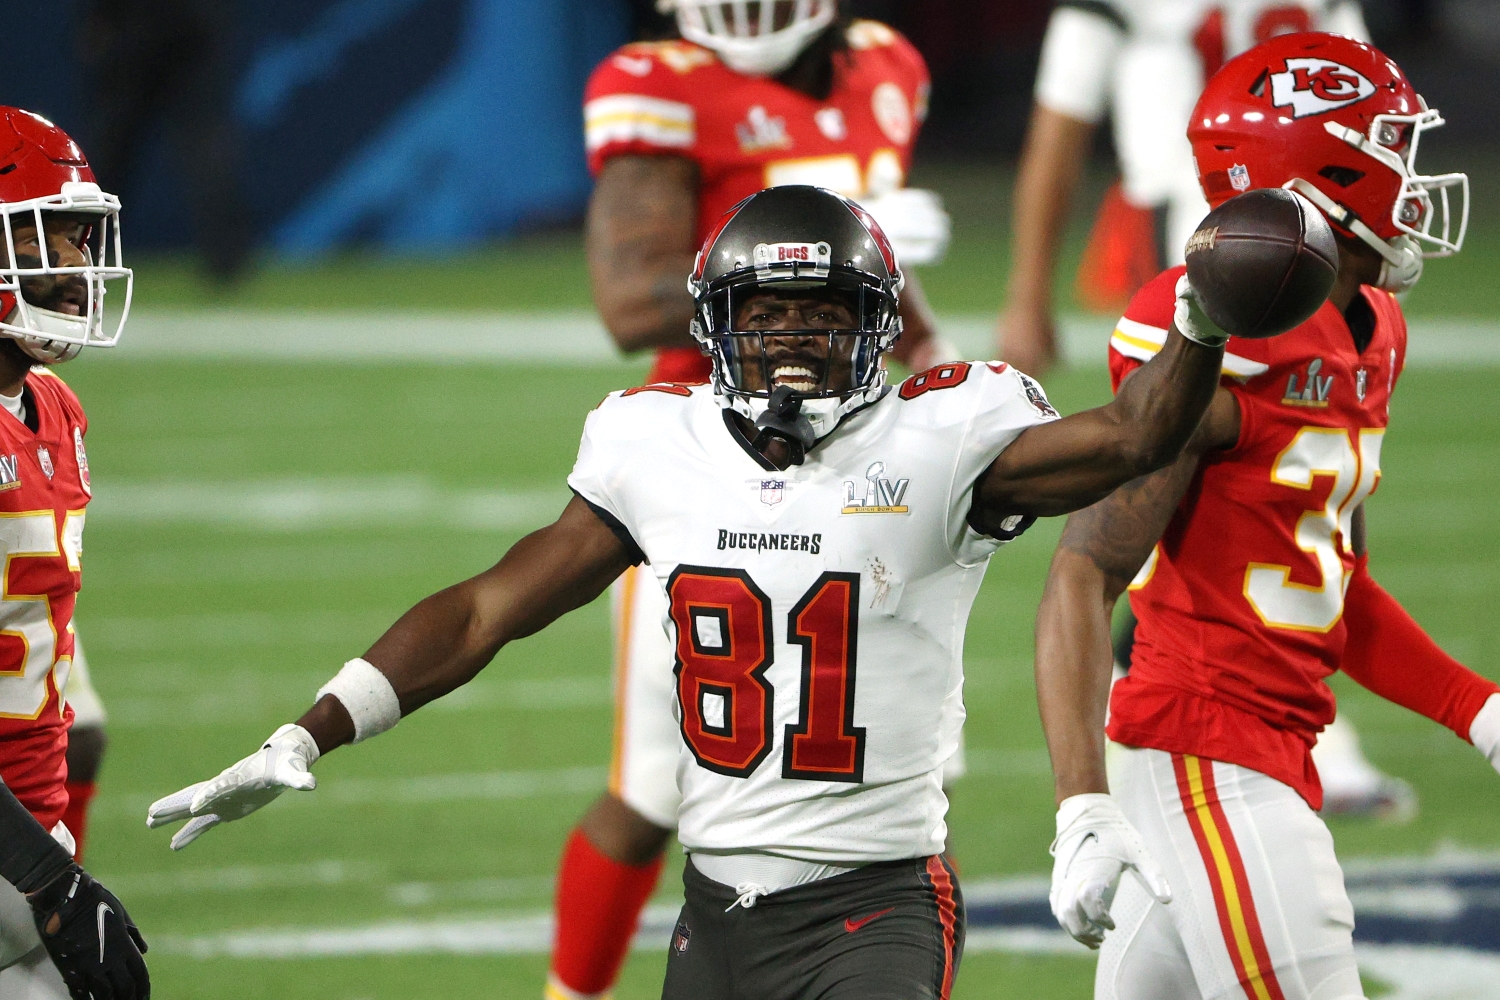 Buccaneers WR Antonio Brown reacts after catching a pass in Super Bowl 55.